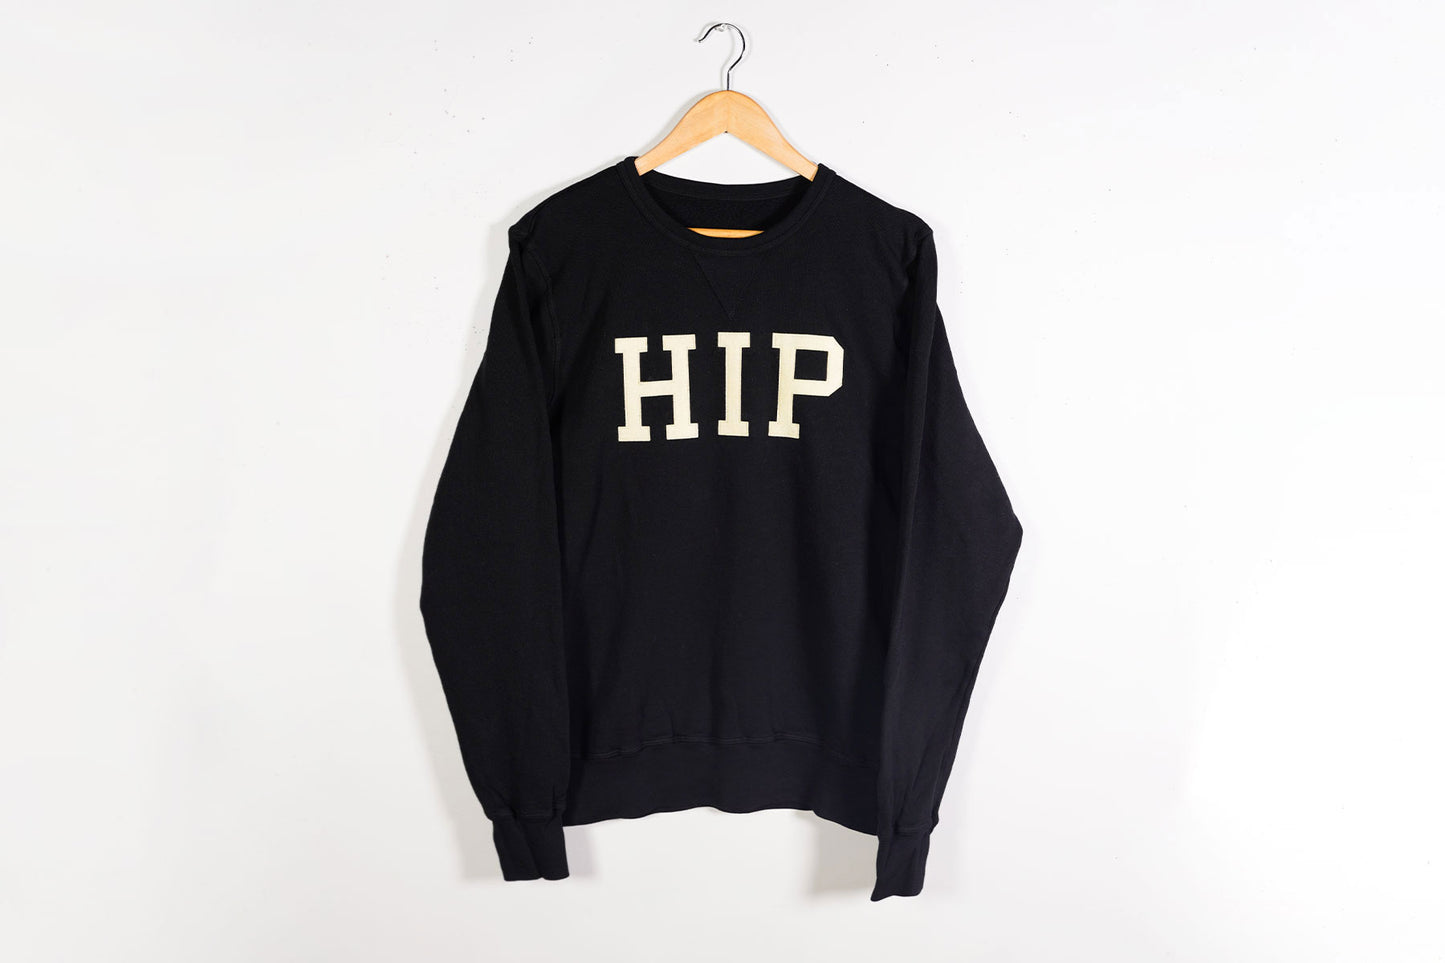 The Hip Stitched Sweatshirt • The Tragically Hip x Oxford Pennant